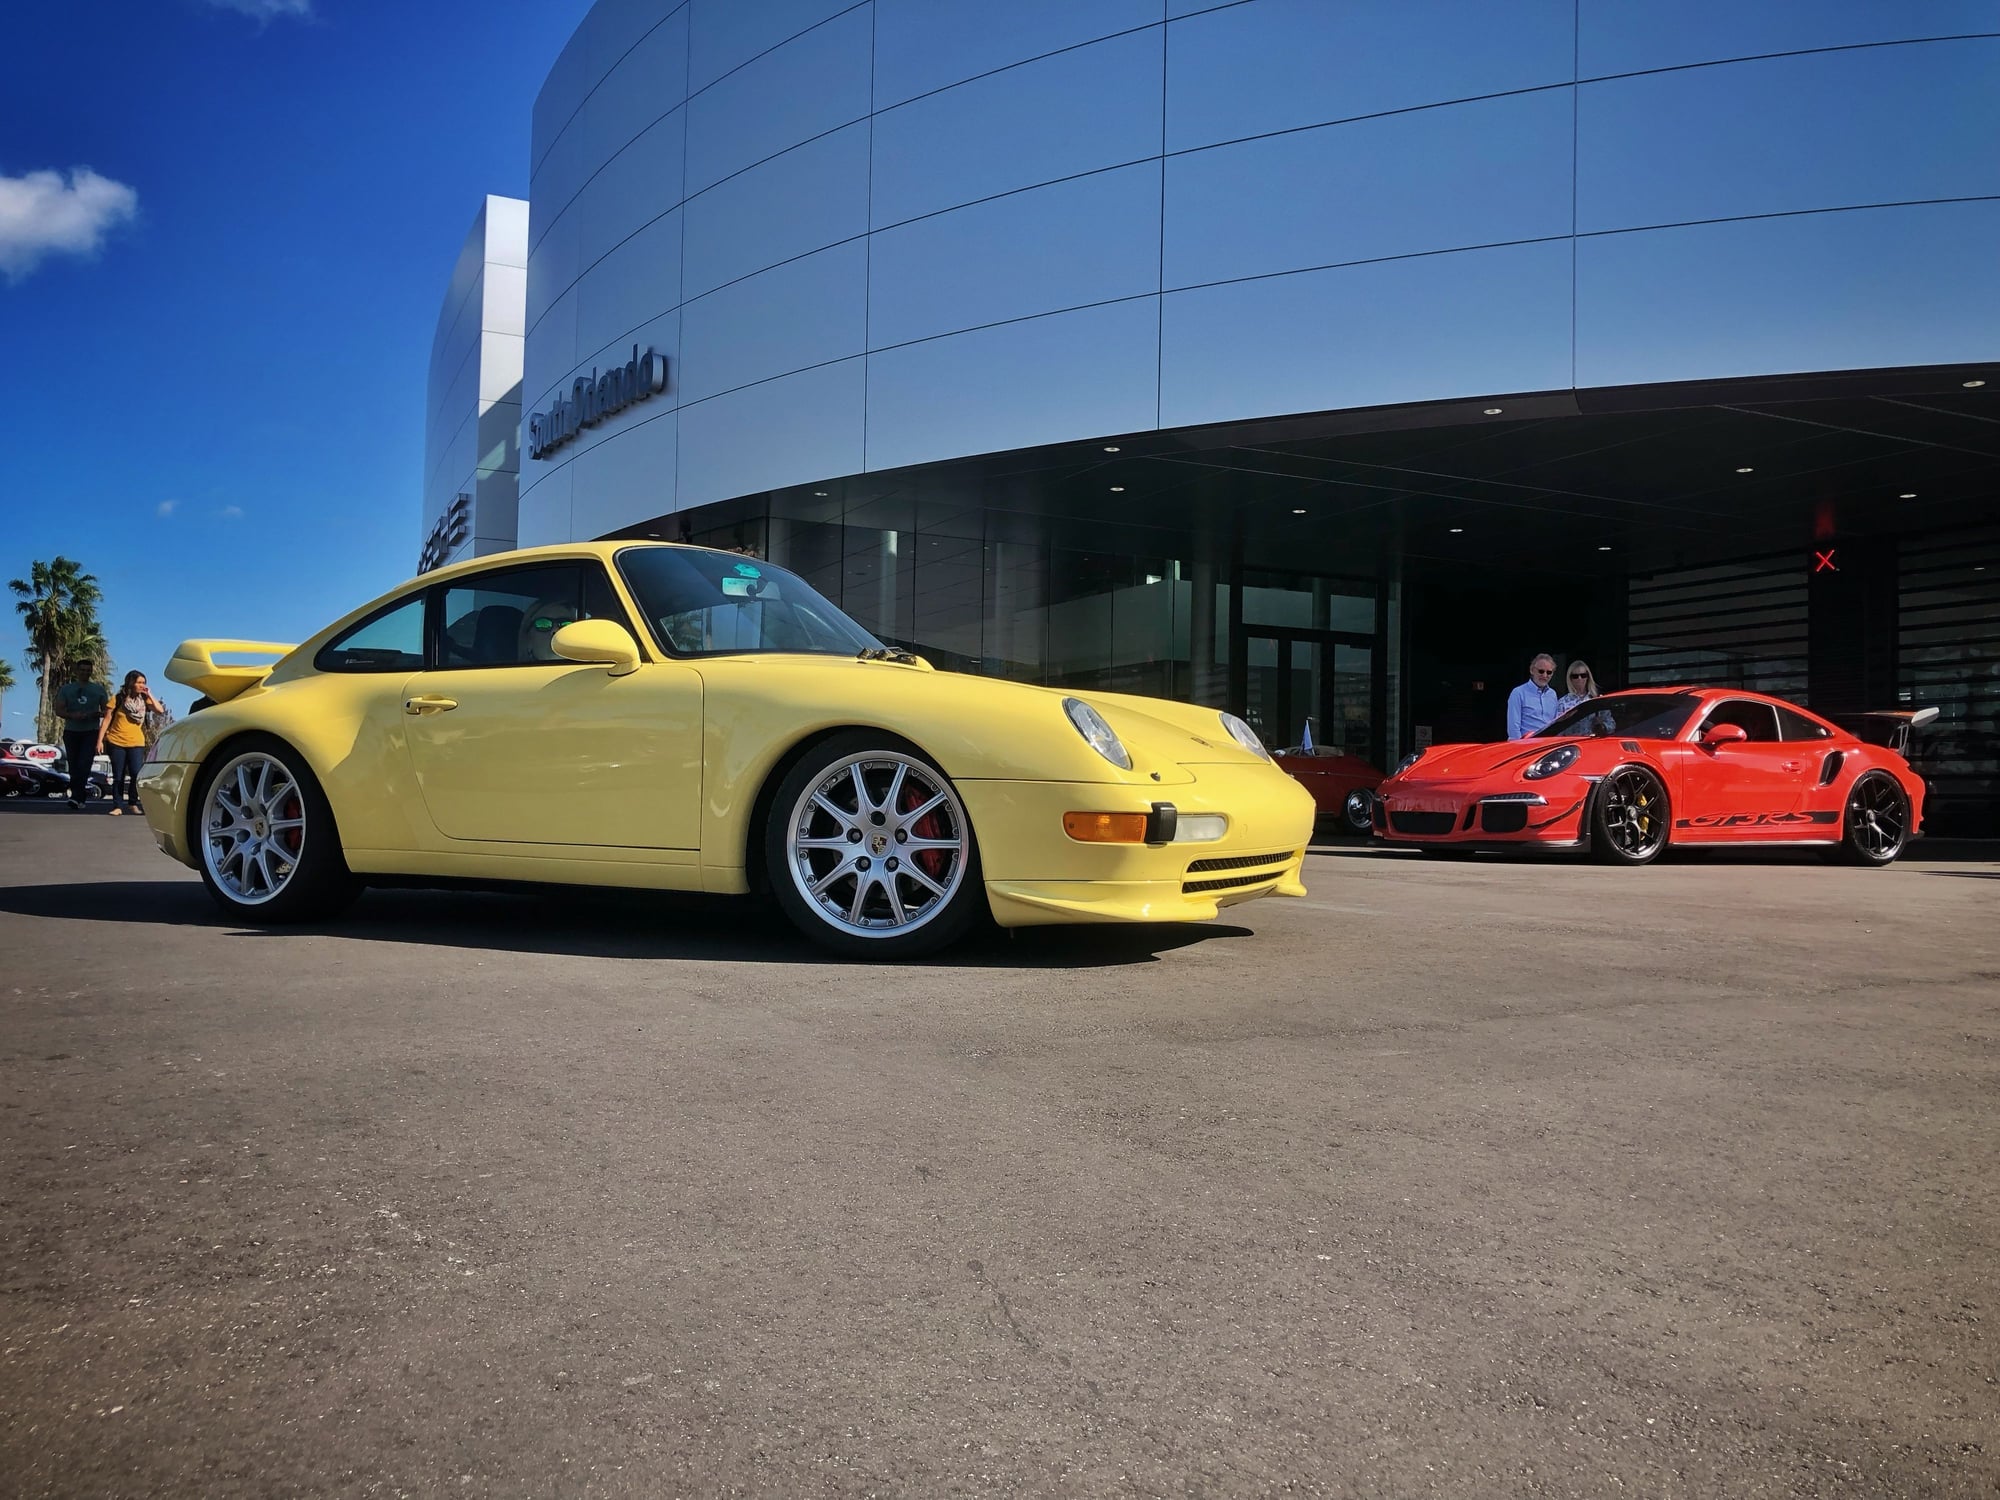 Wheels and Tires/Axles - Porsche BBS Sport Design 18" wheels for 996, 993, Boxster - Used - 1995 to 2003 Porsche 911 - Orlando, FL 32765, United States